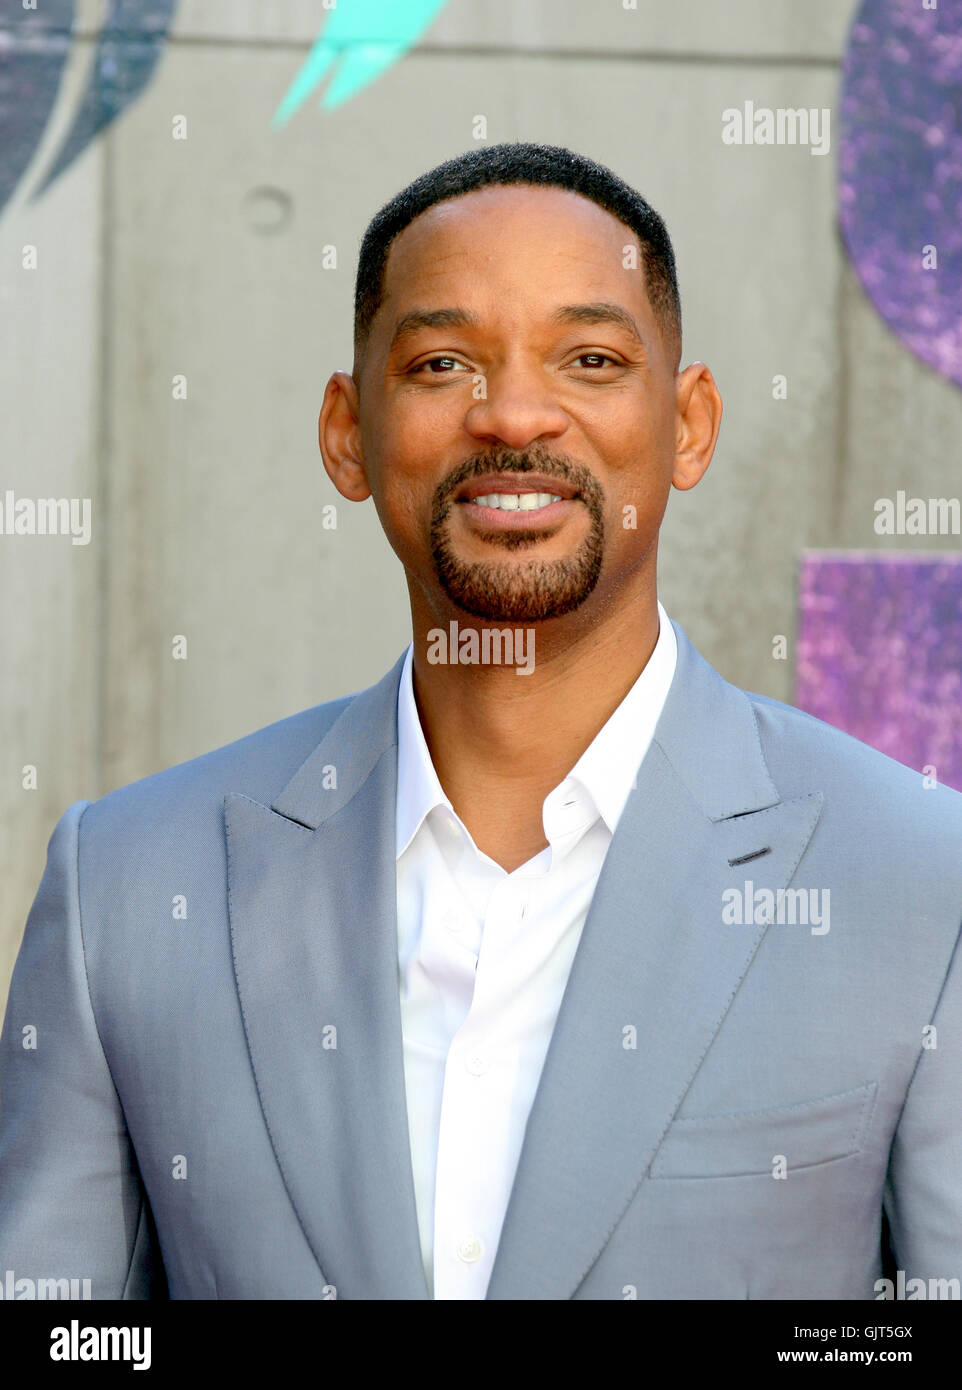 Will Smith attends the Suicide Squad film premiere, London, UK - 03 Aug 2016 Stock Photo